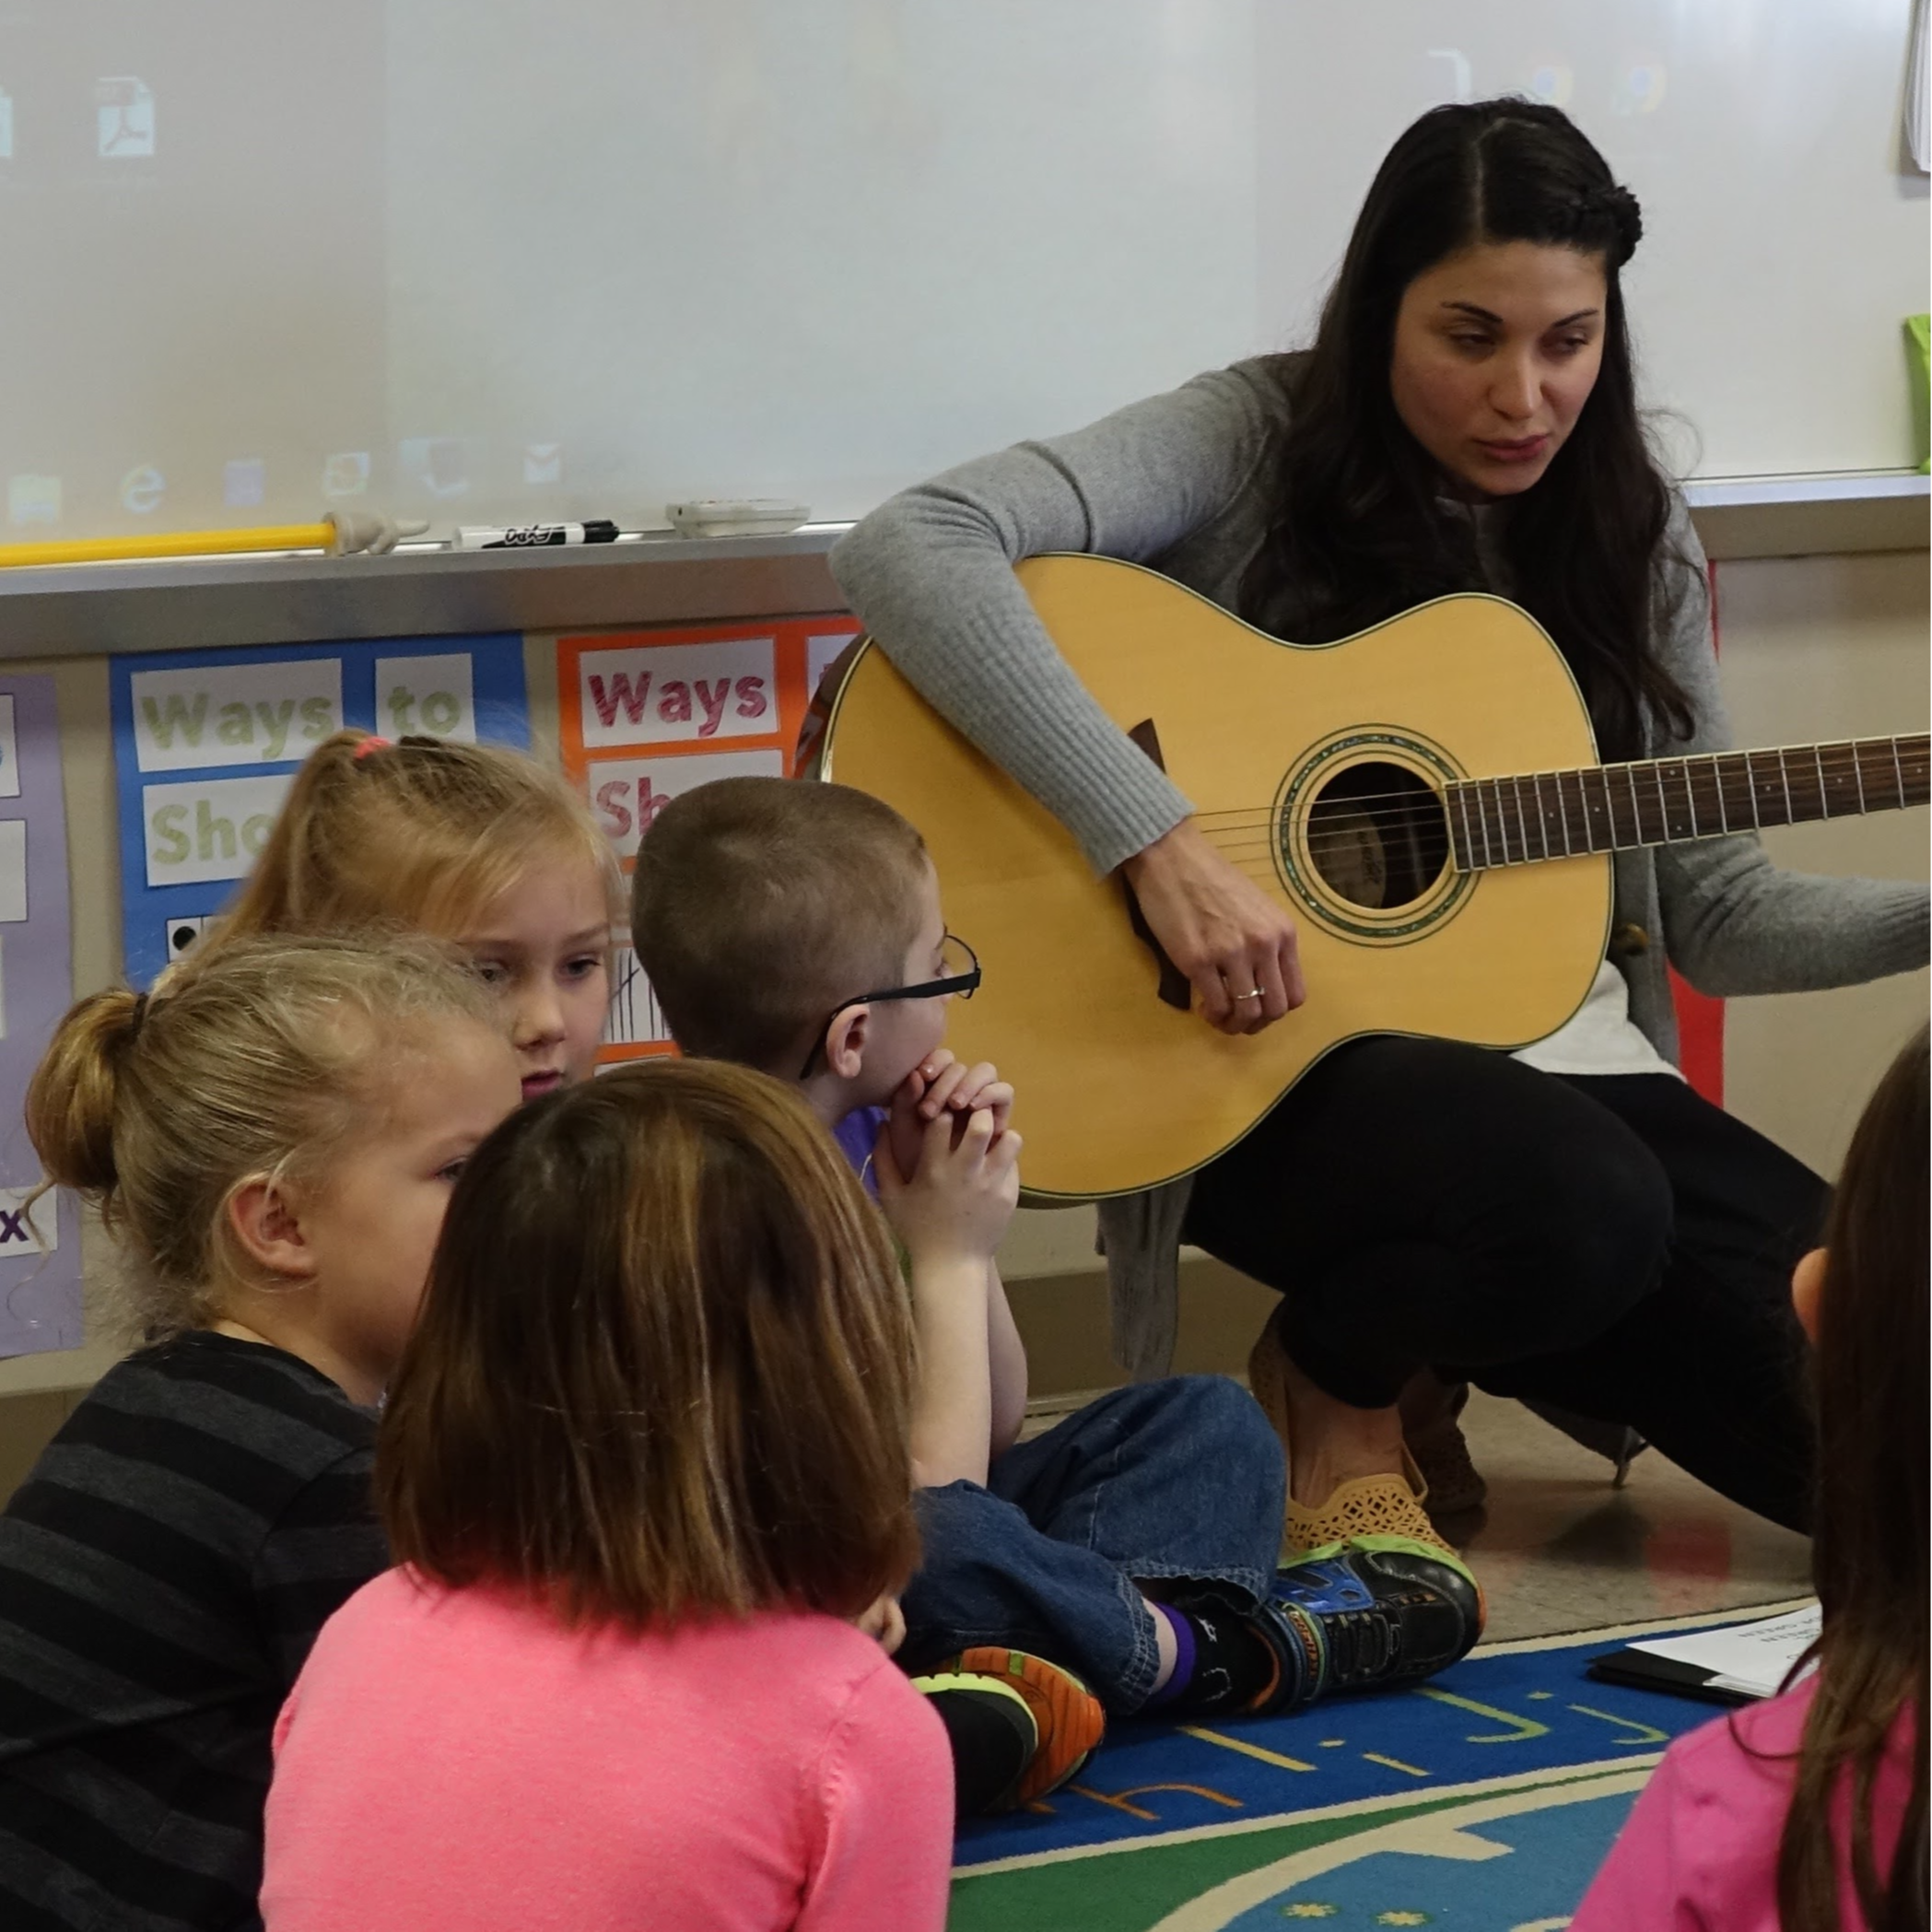 guitarist playing music for students seated on the floor